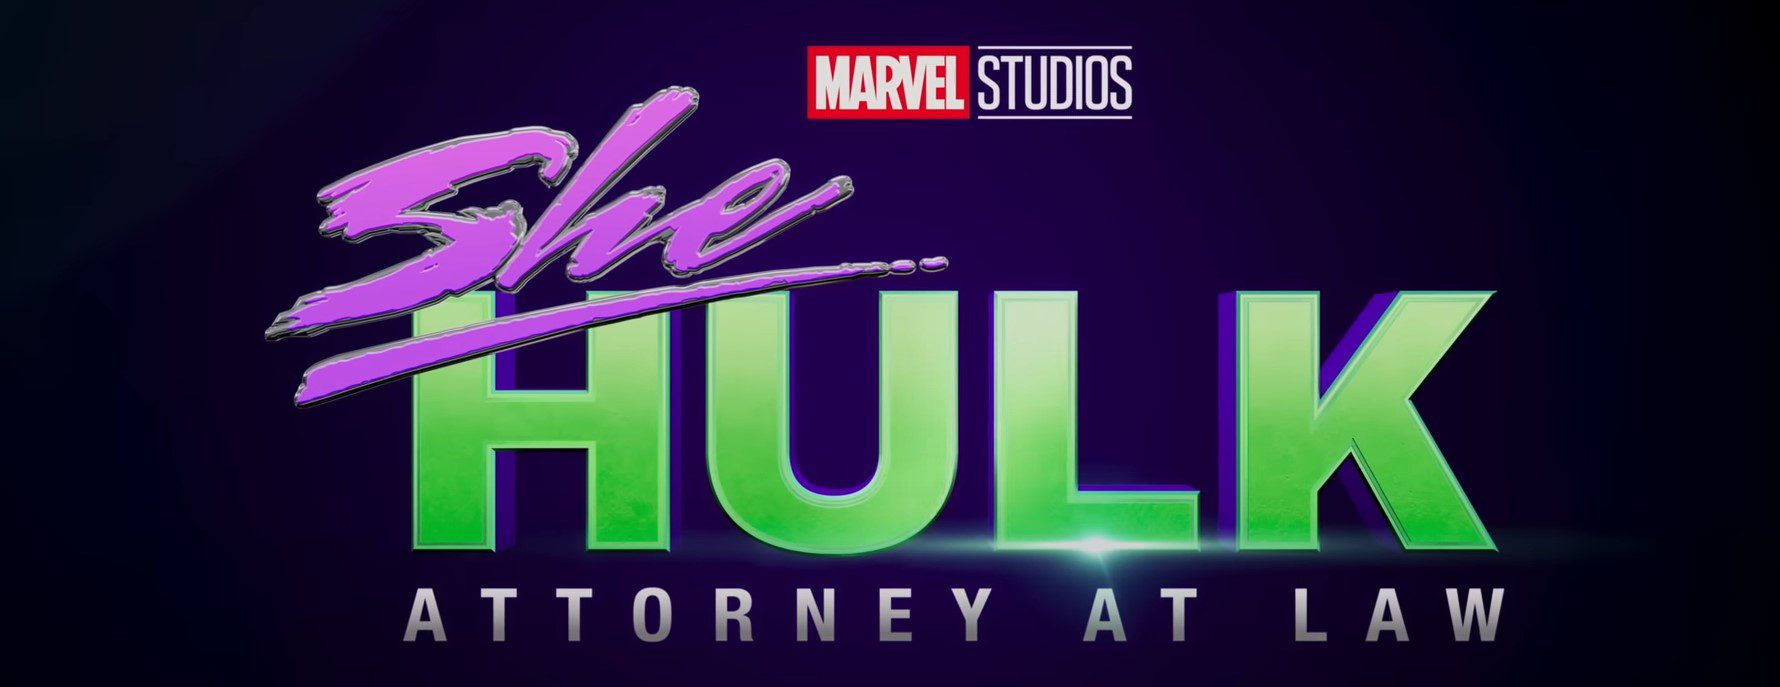 She-Hulk: Attorney At Law Season 1 Episode 1 Release Date